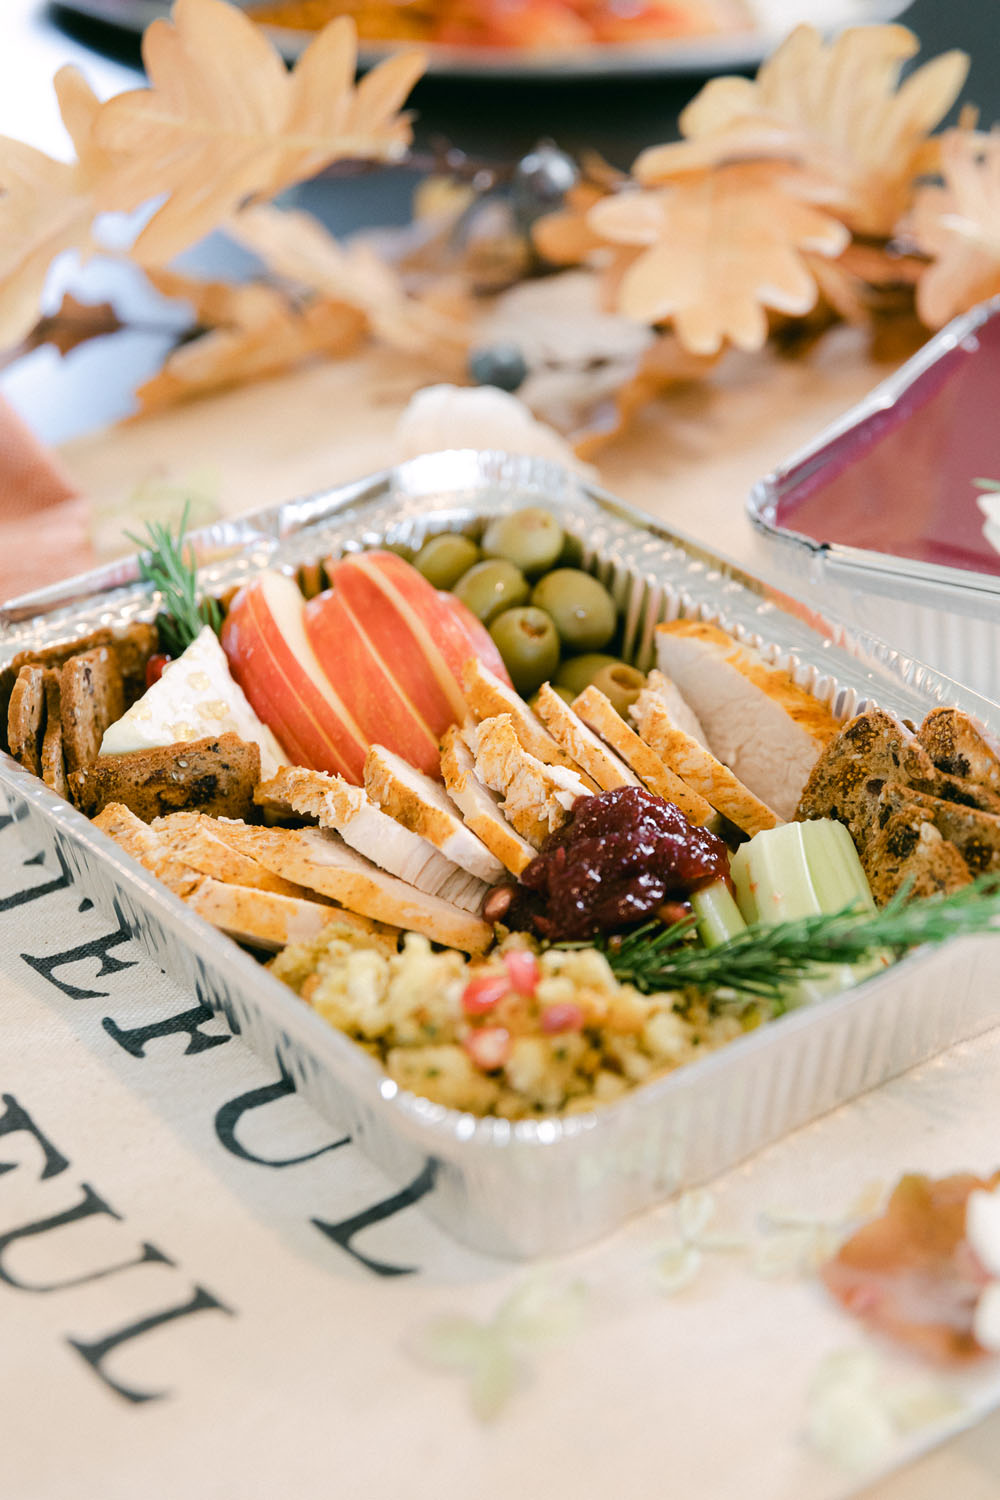 friendsgiving ideas - takeaway containers